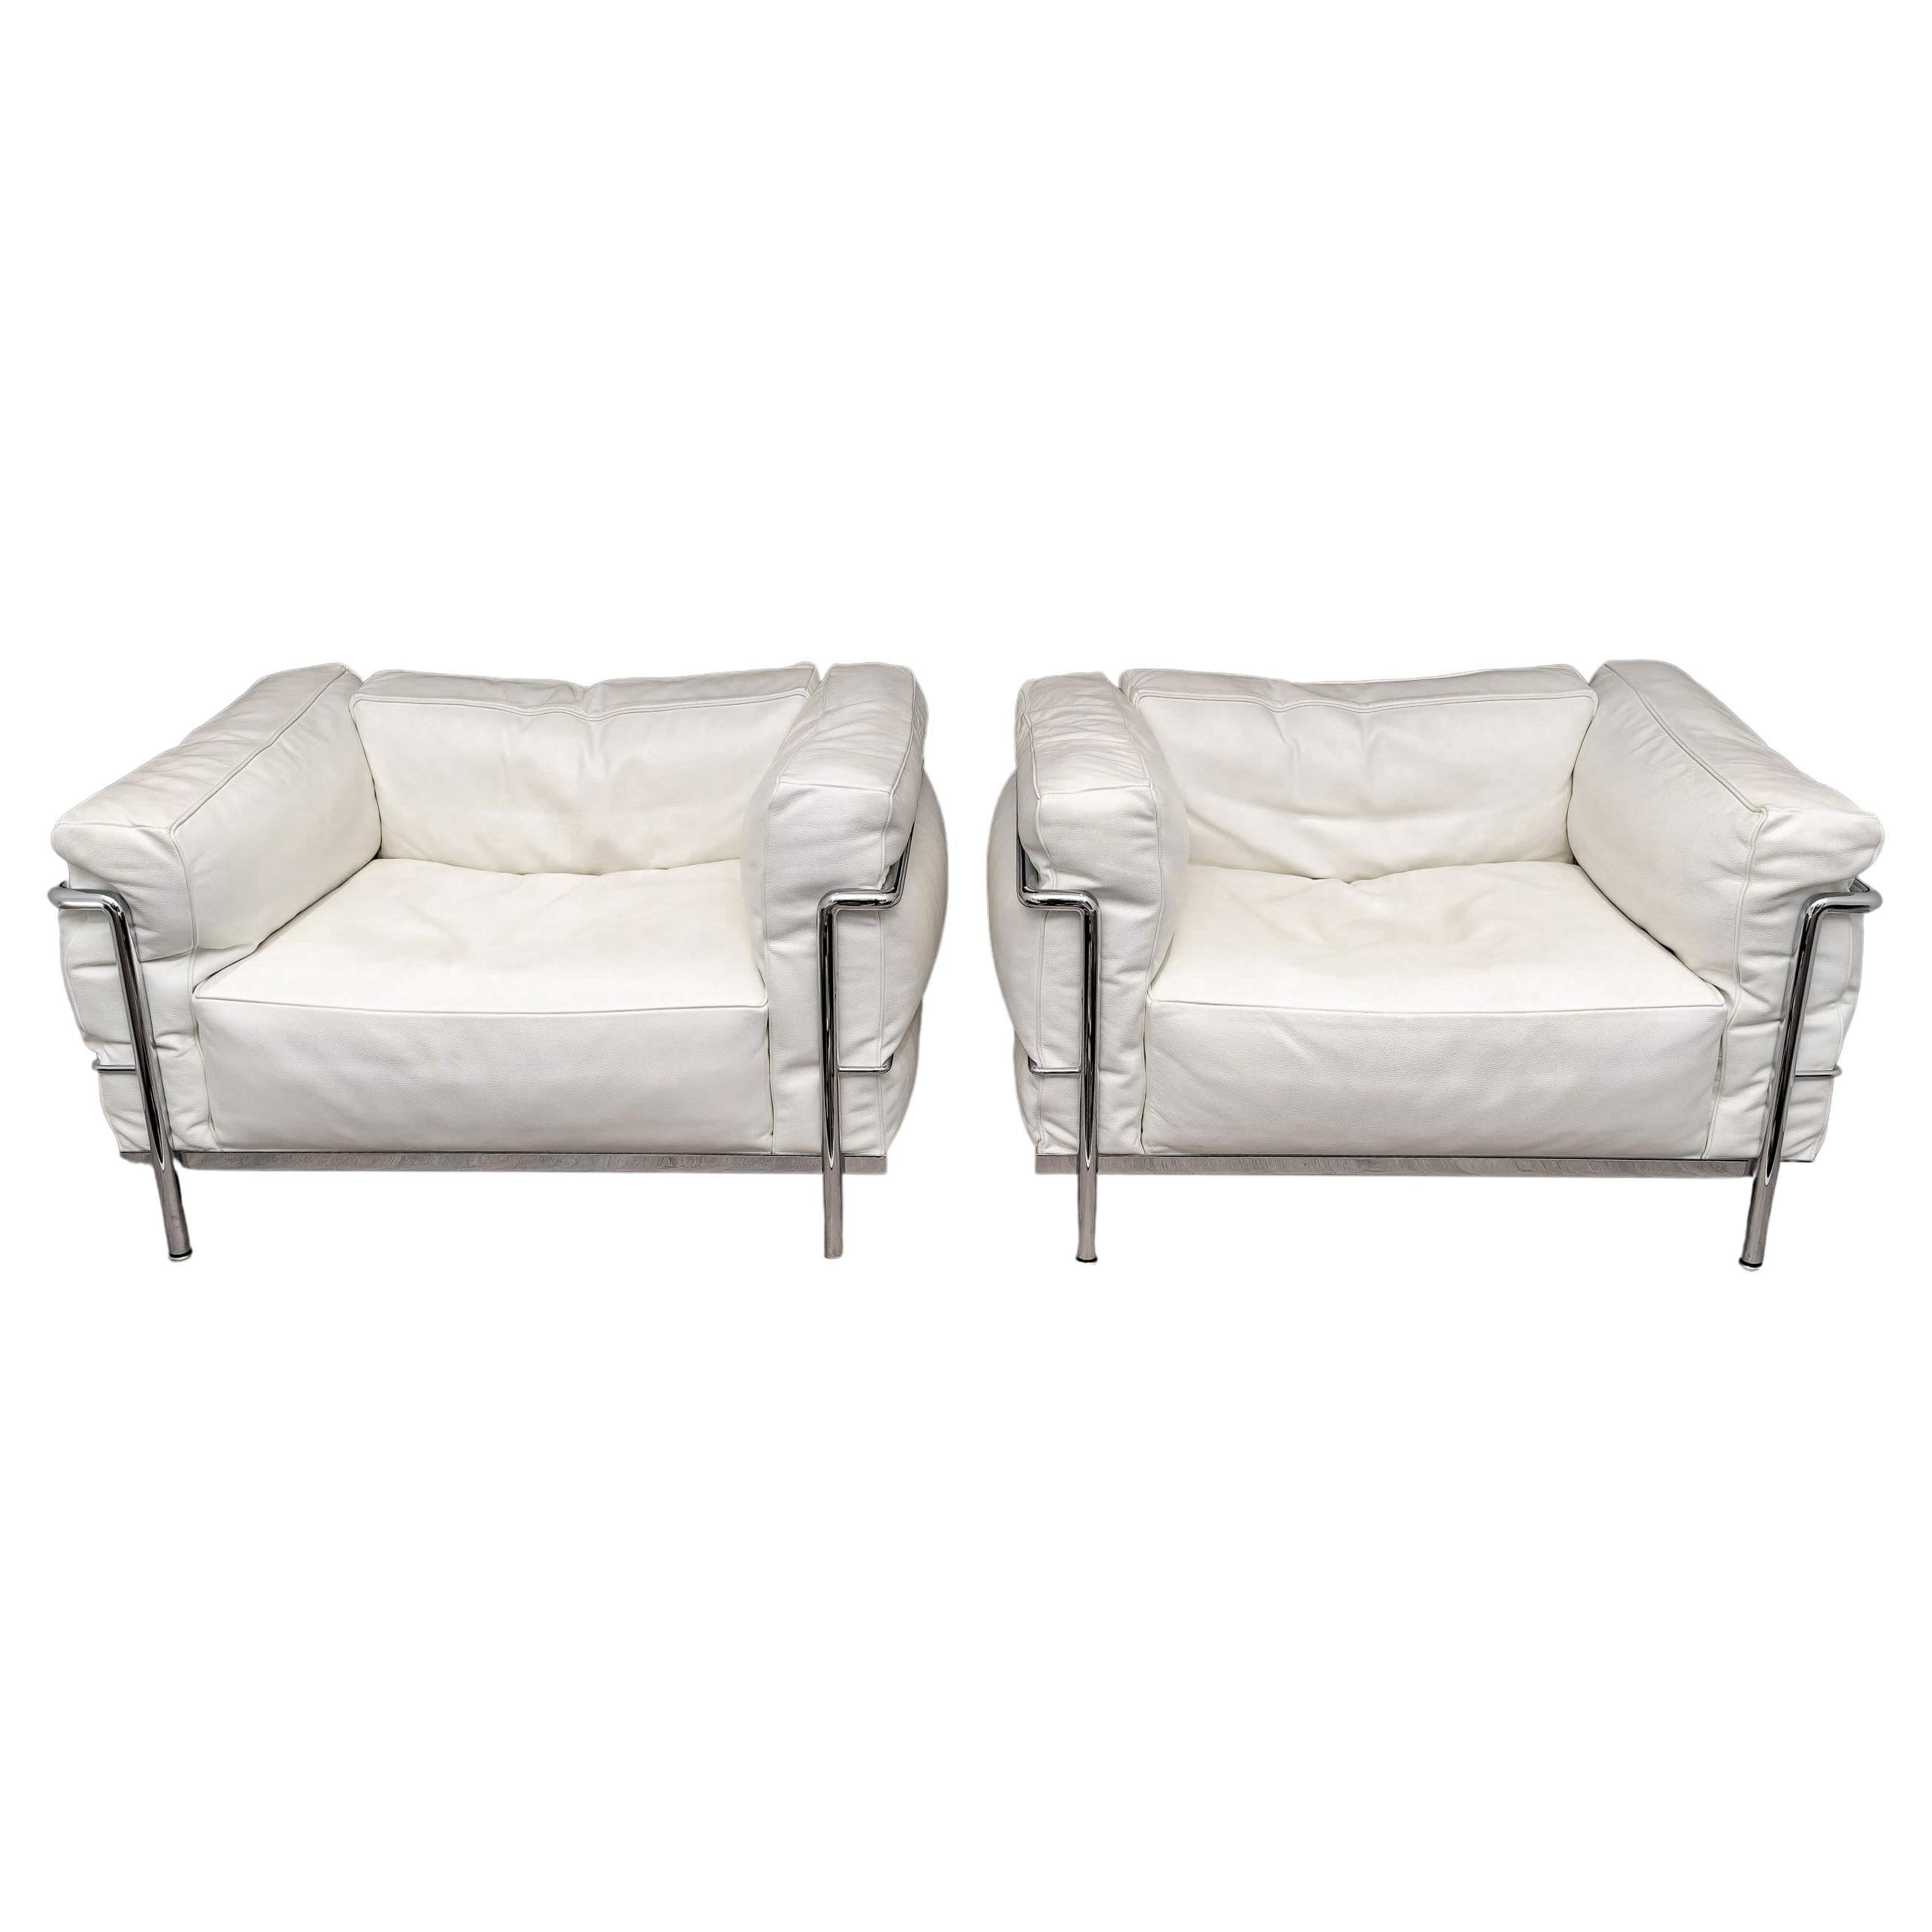 Le Corbusier, Perriand, Jeanneret, Cassina Pair of LC3 Armchairs White Leather